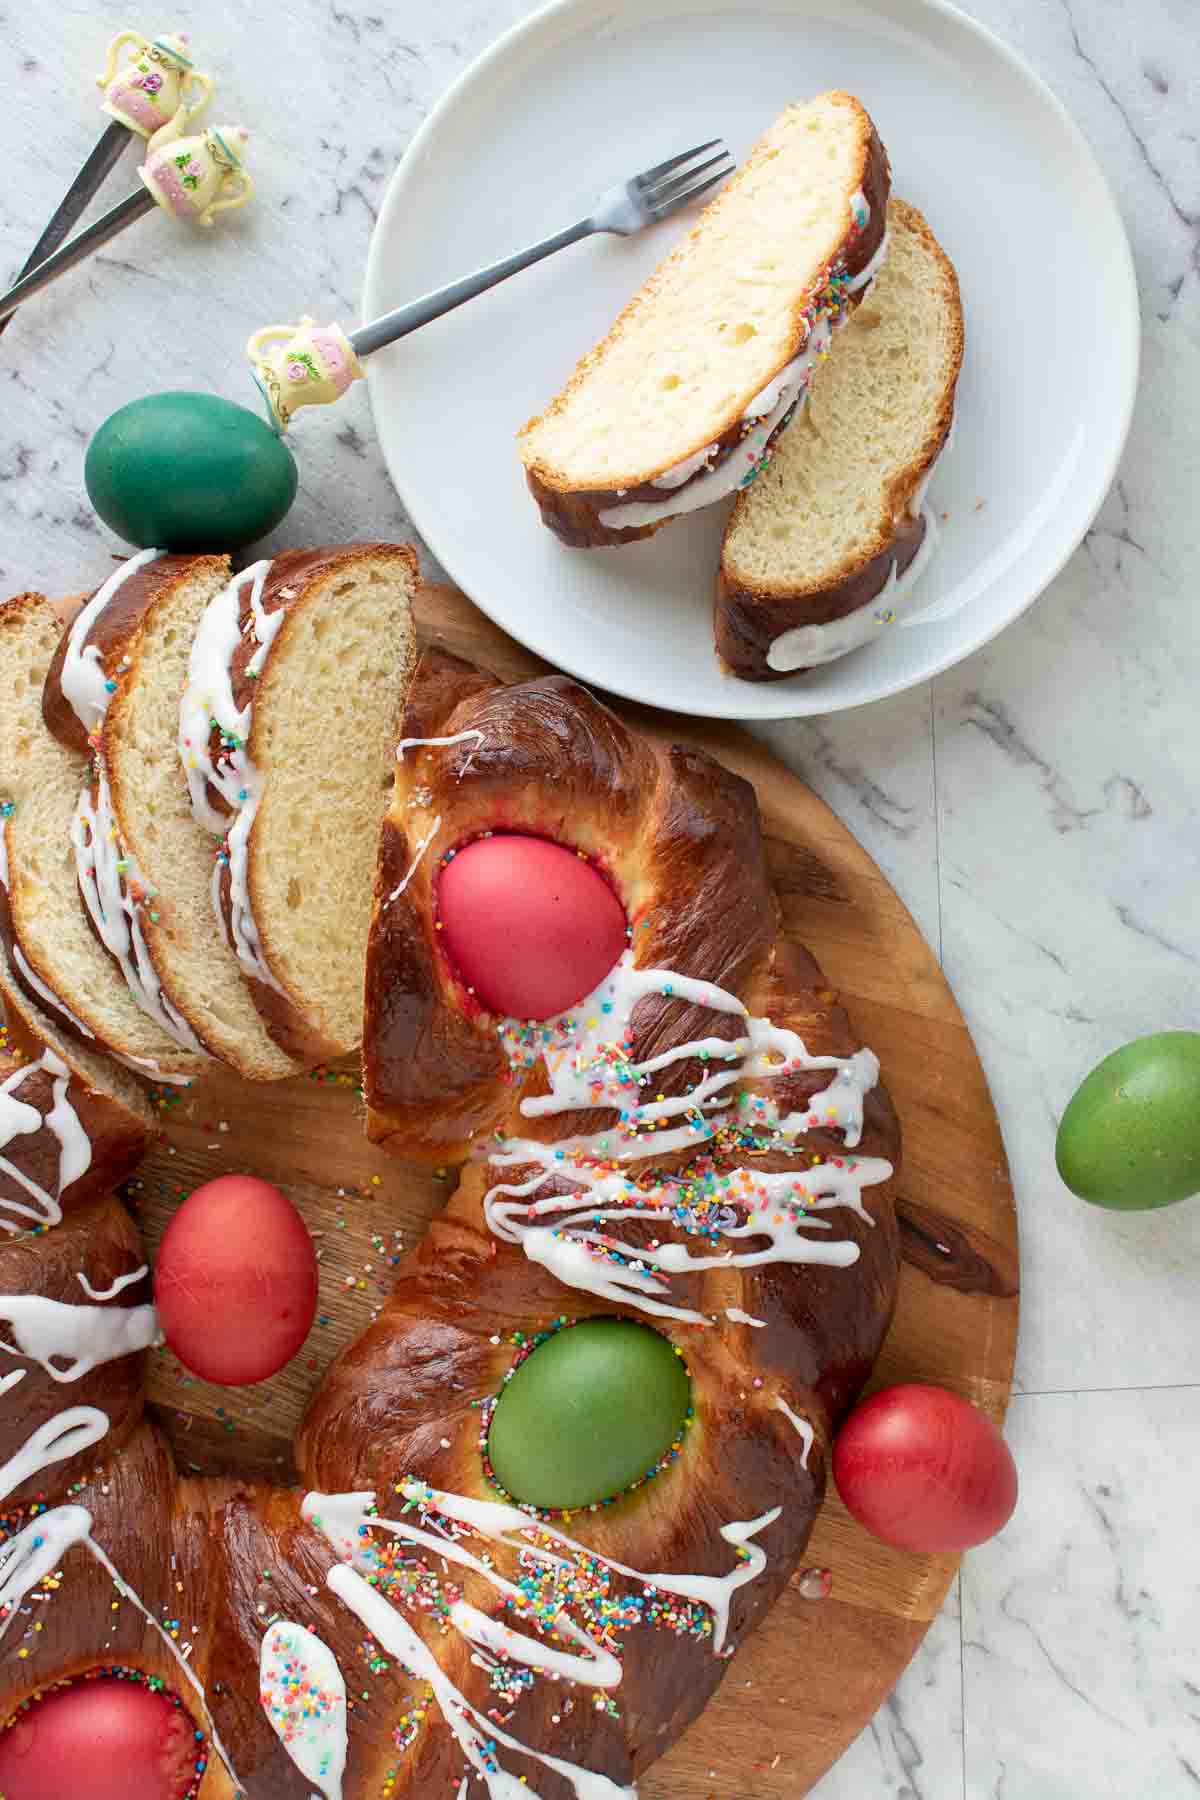 Italian Easter bread served on a wooden board and a slice on a white plate.